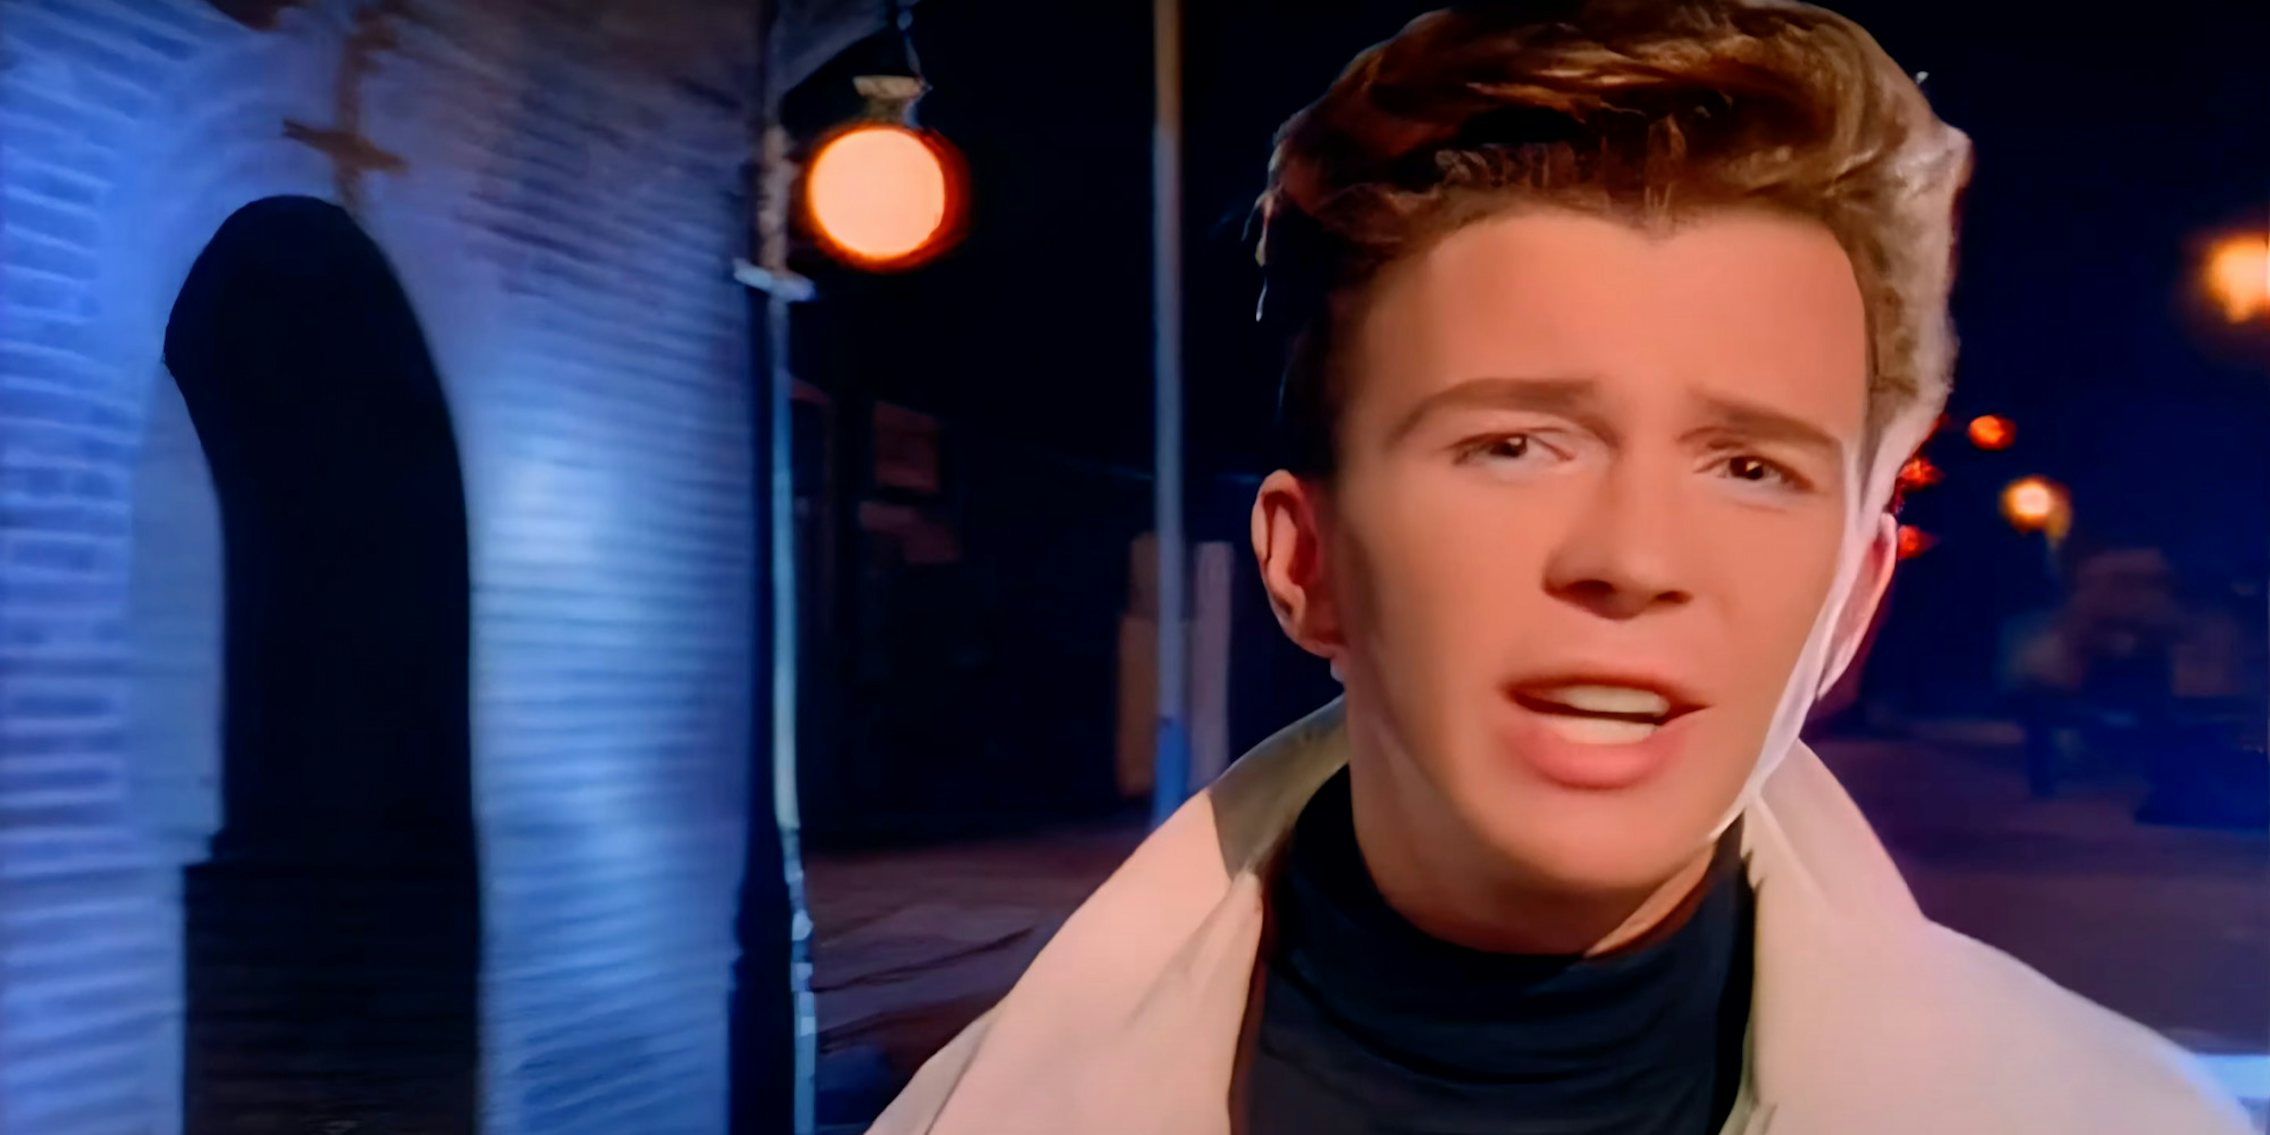 Rick Astley's Remastered 'Never Gonna Give You Up' Video: Reactions –  Billboard